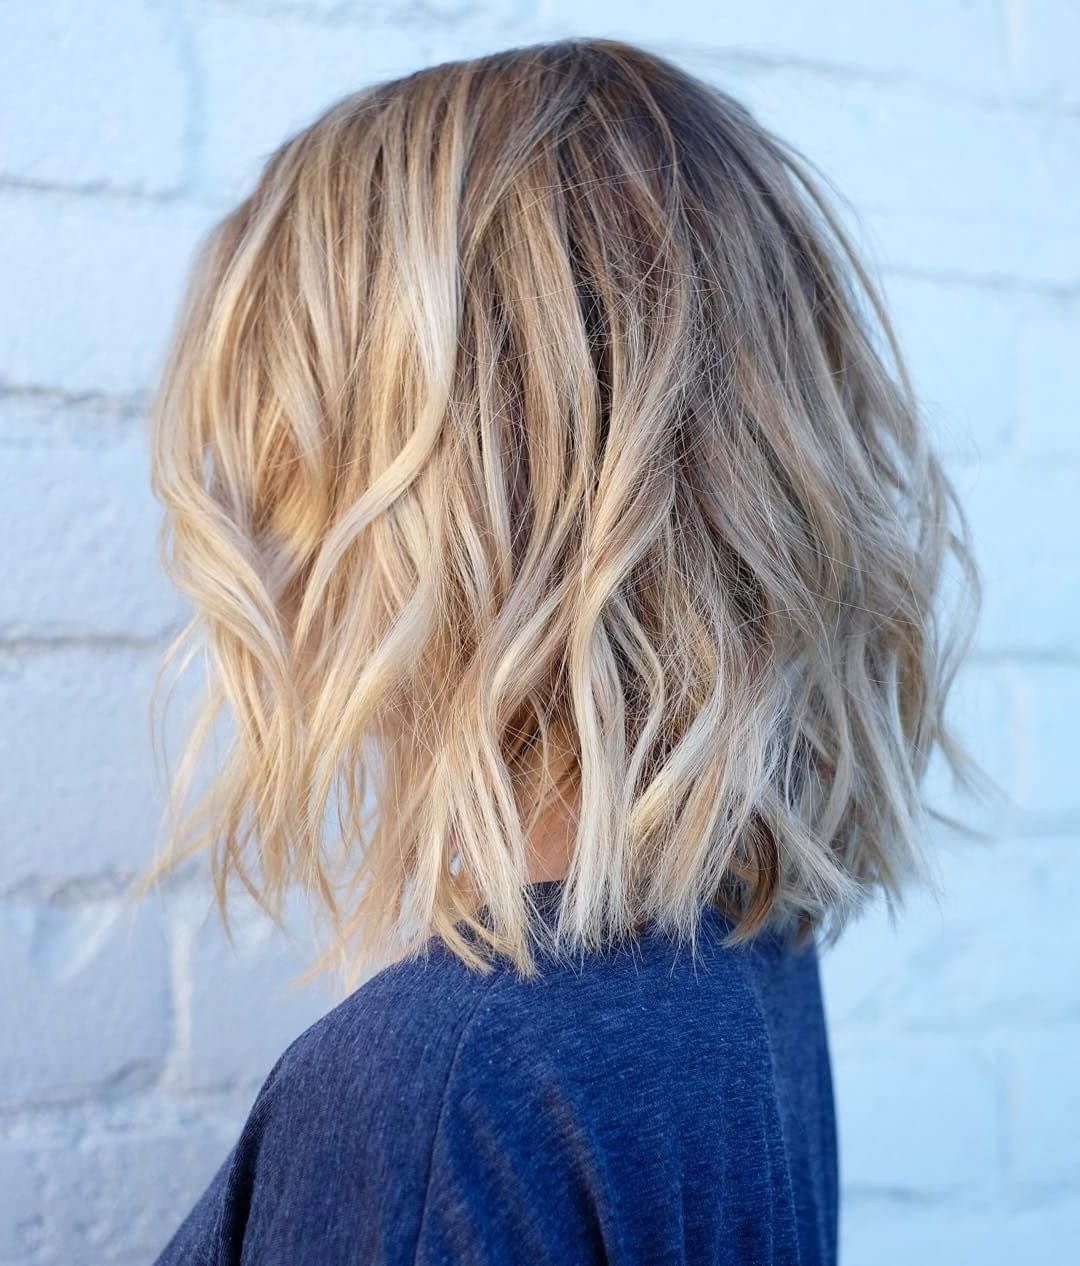 Recent Sunkissed Long Locks Blonde Hairstyles Within 50 Fresh Short Blonde Hair Ideas To Update Your Style In  (View 18 of 20)